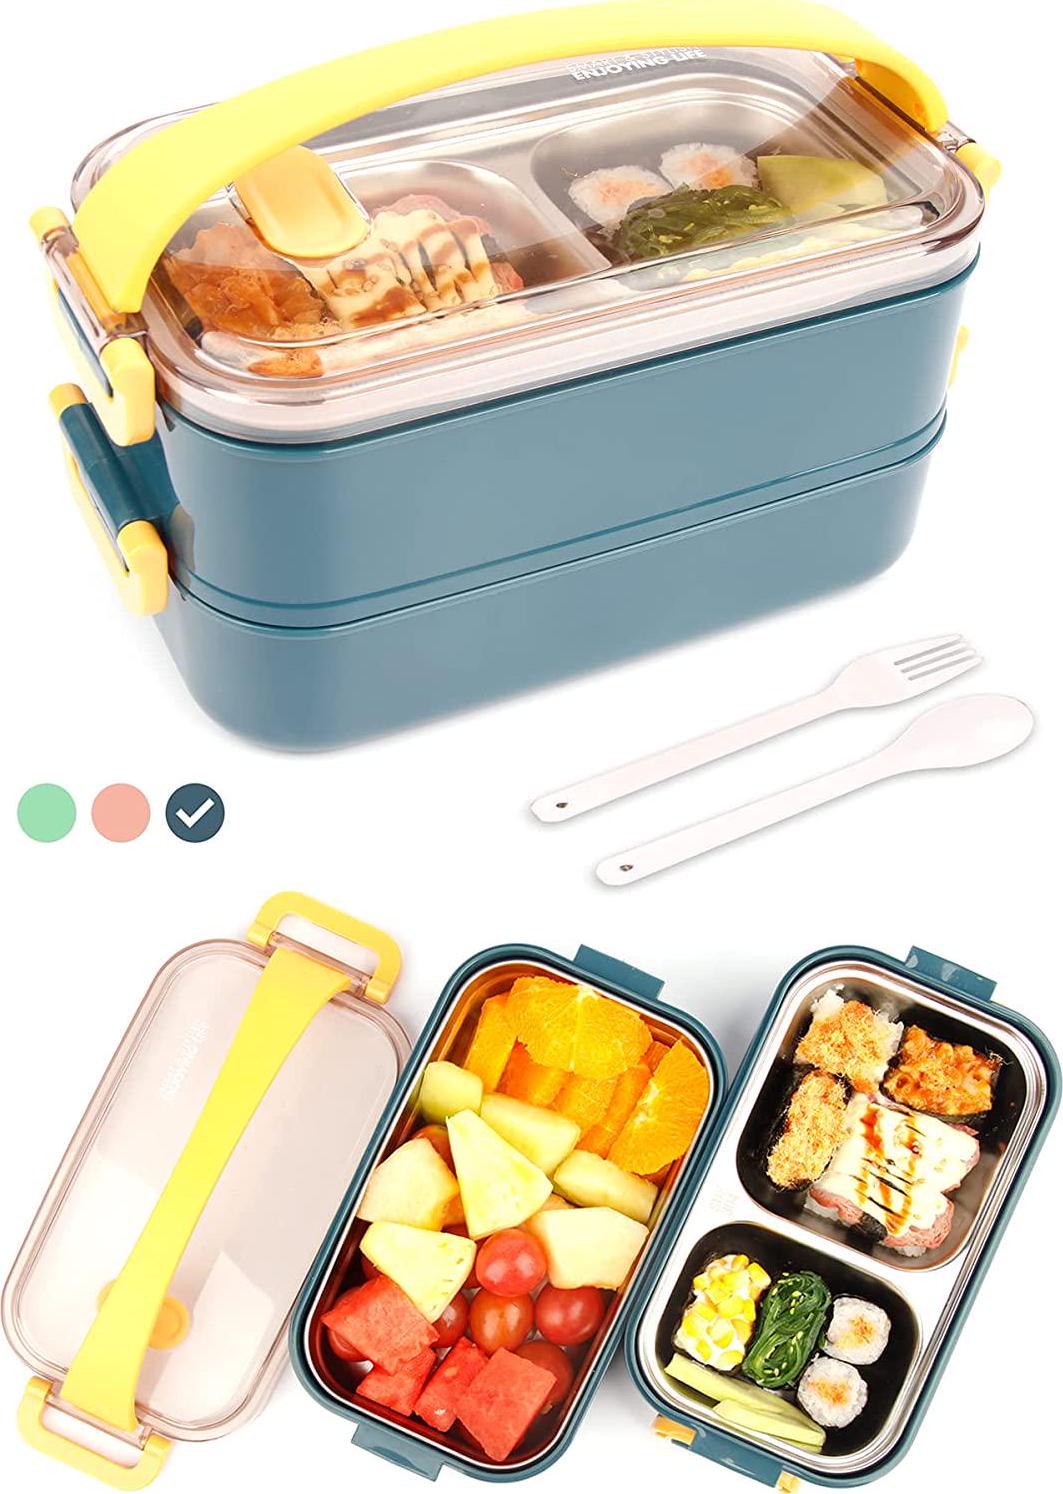 Koncle, Lunch Box, Koncle Bento Box for Adults and Kids, Leakproof Stackable Lunch Containers with Spoon and Fork, Dishwasher and Microwave Safe Stainless Steel Japanese Lunch Box Food Storage containers 1.6L